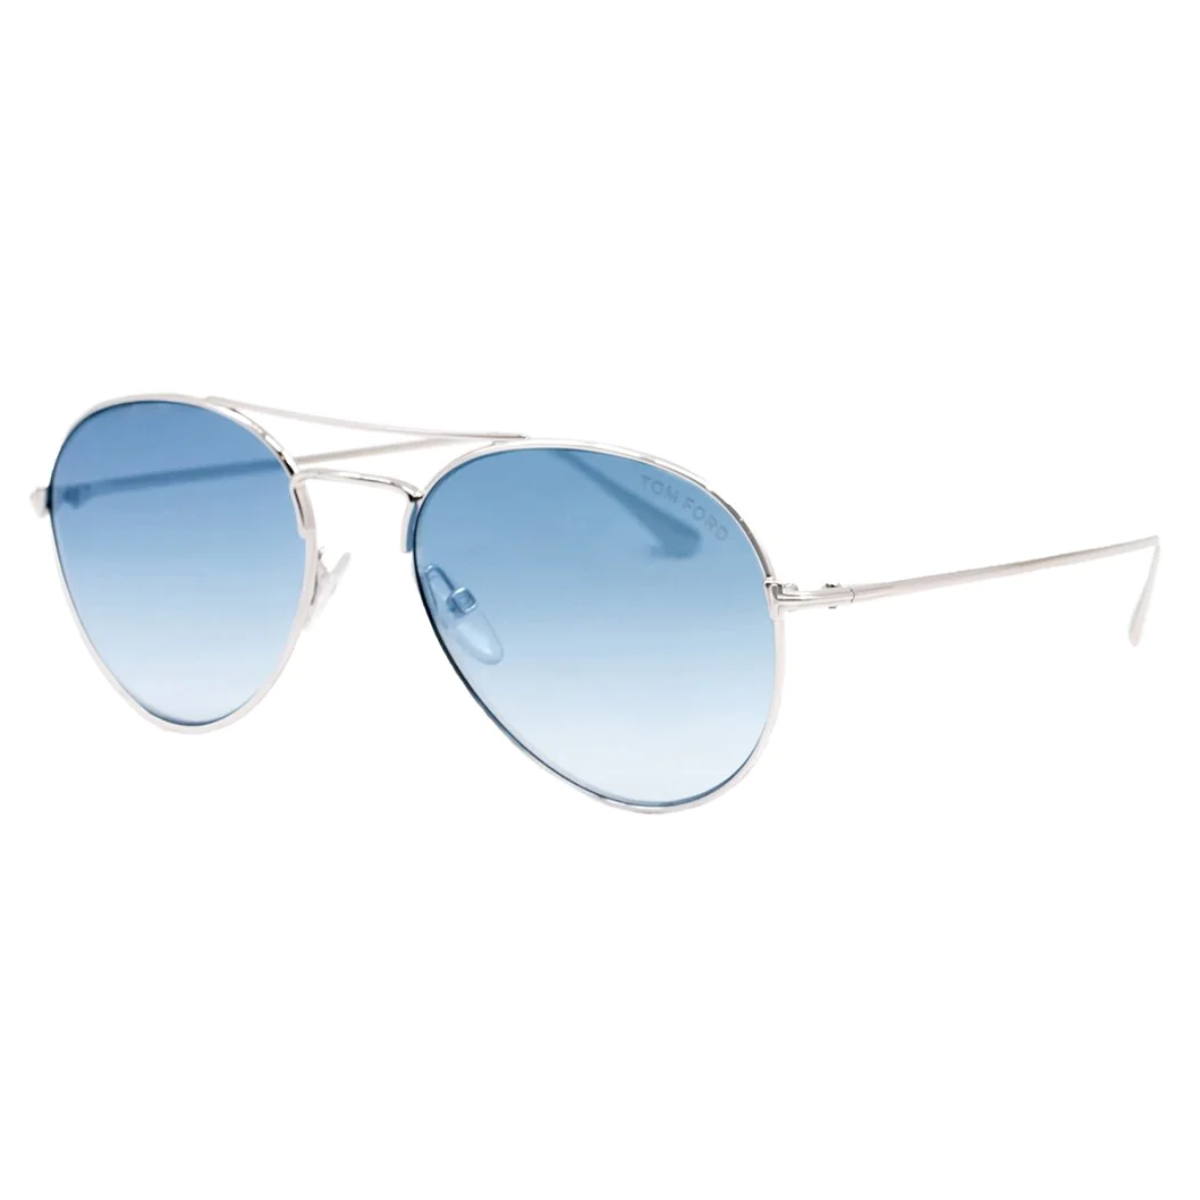 "Fashion-forward look with Tom Ford 551 aviator sunglasses, highlighting their full-frame design and blue gradient lenses, perfect for enhancing any outfit with a touch of sophistication."